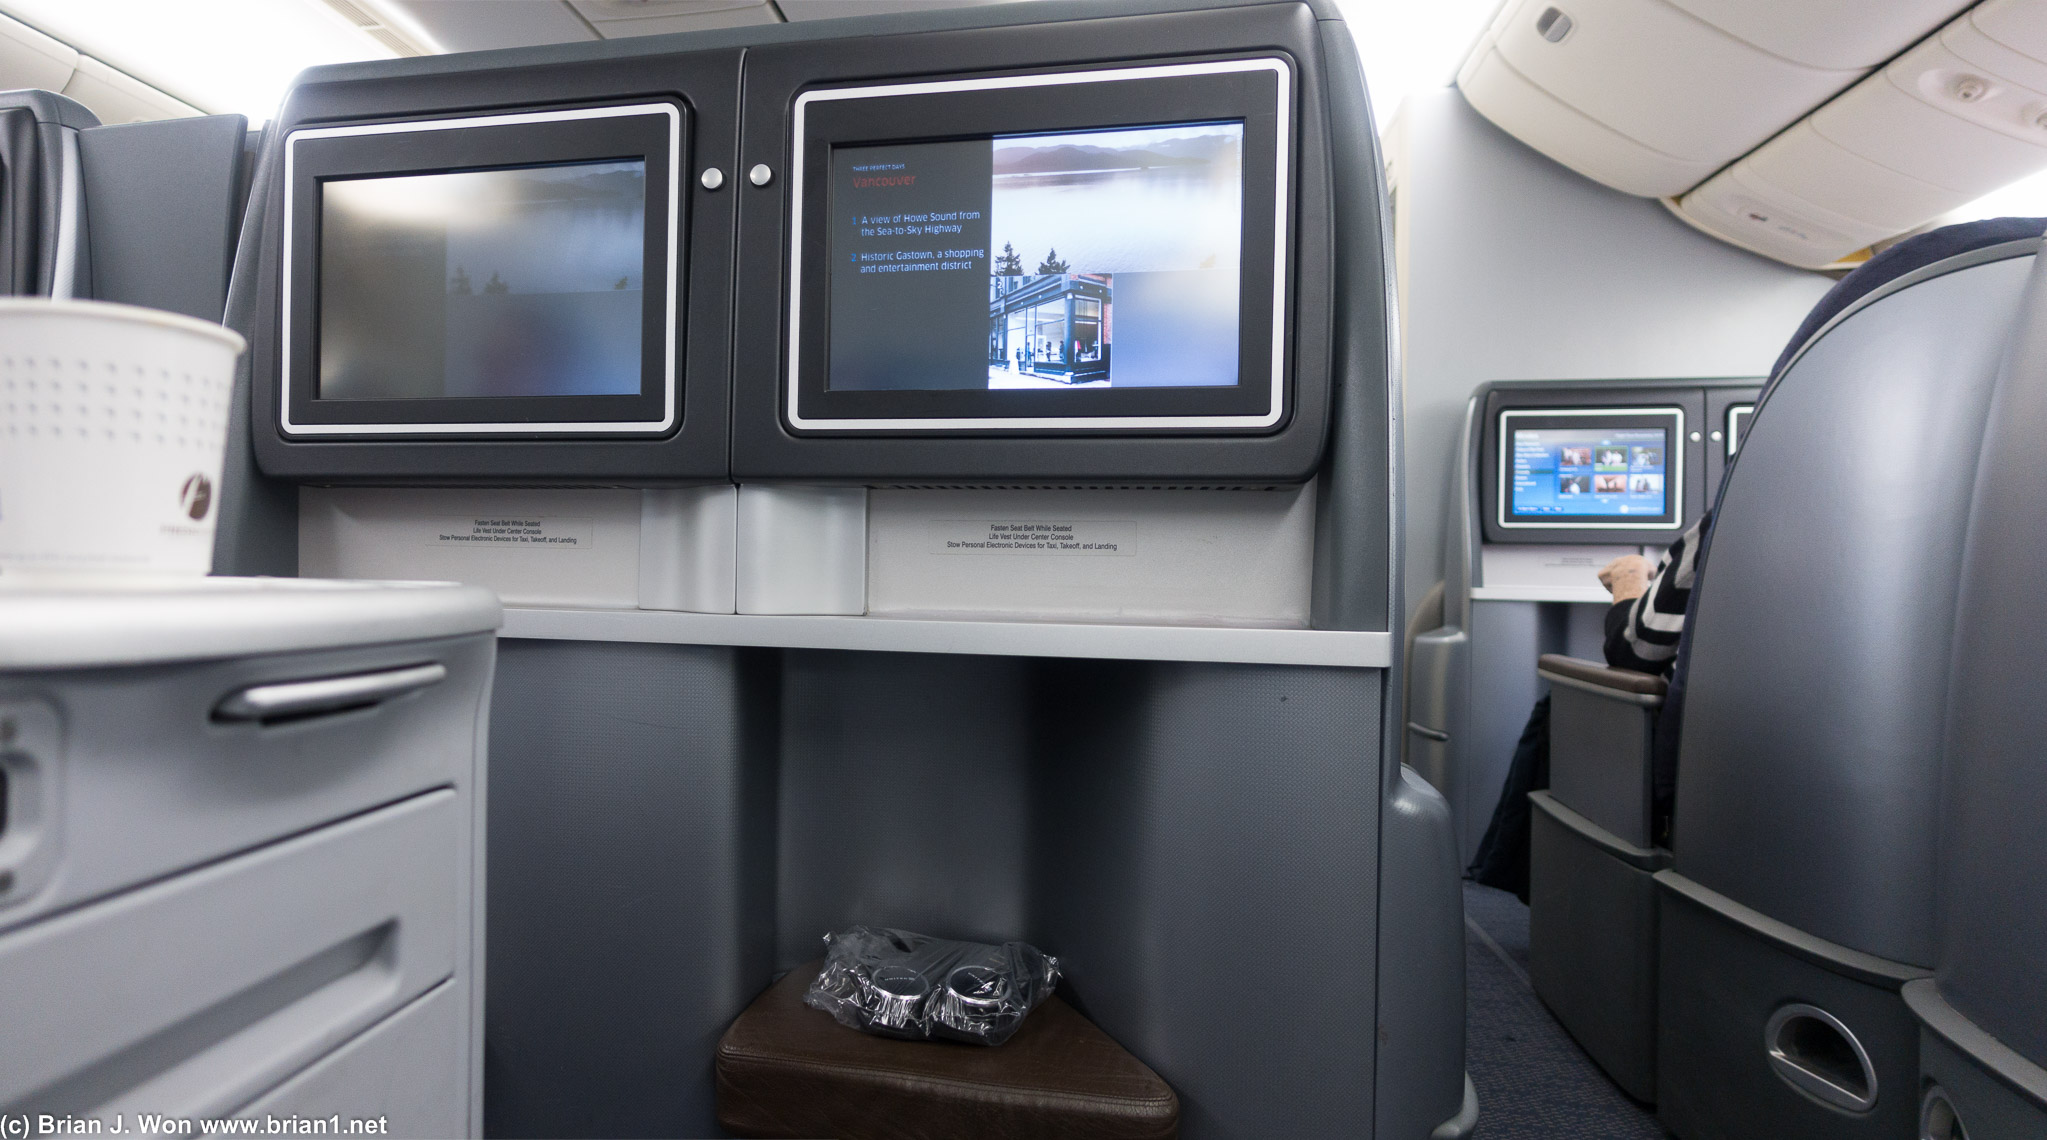 United business class may stink compared to their international competitors, but it still beats economy!